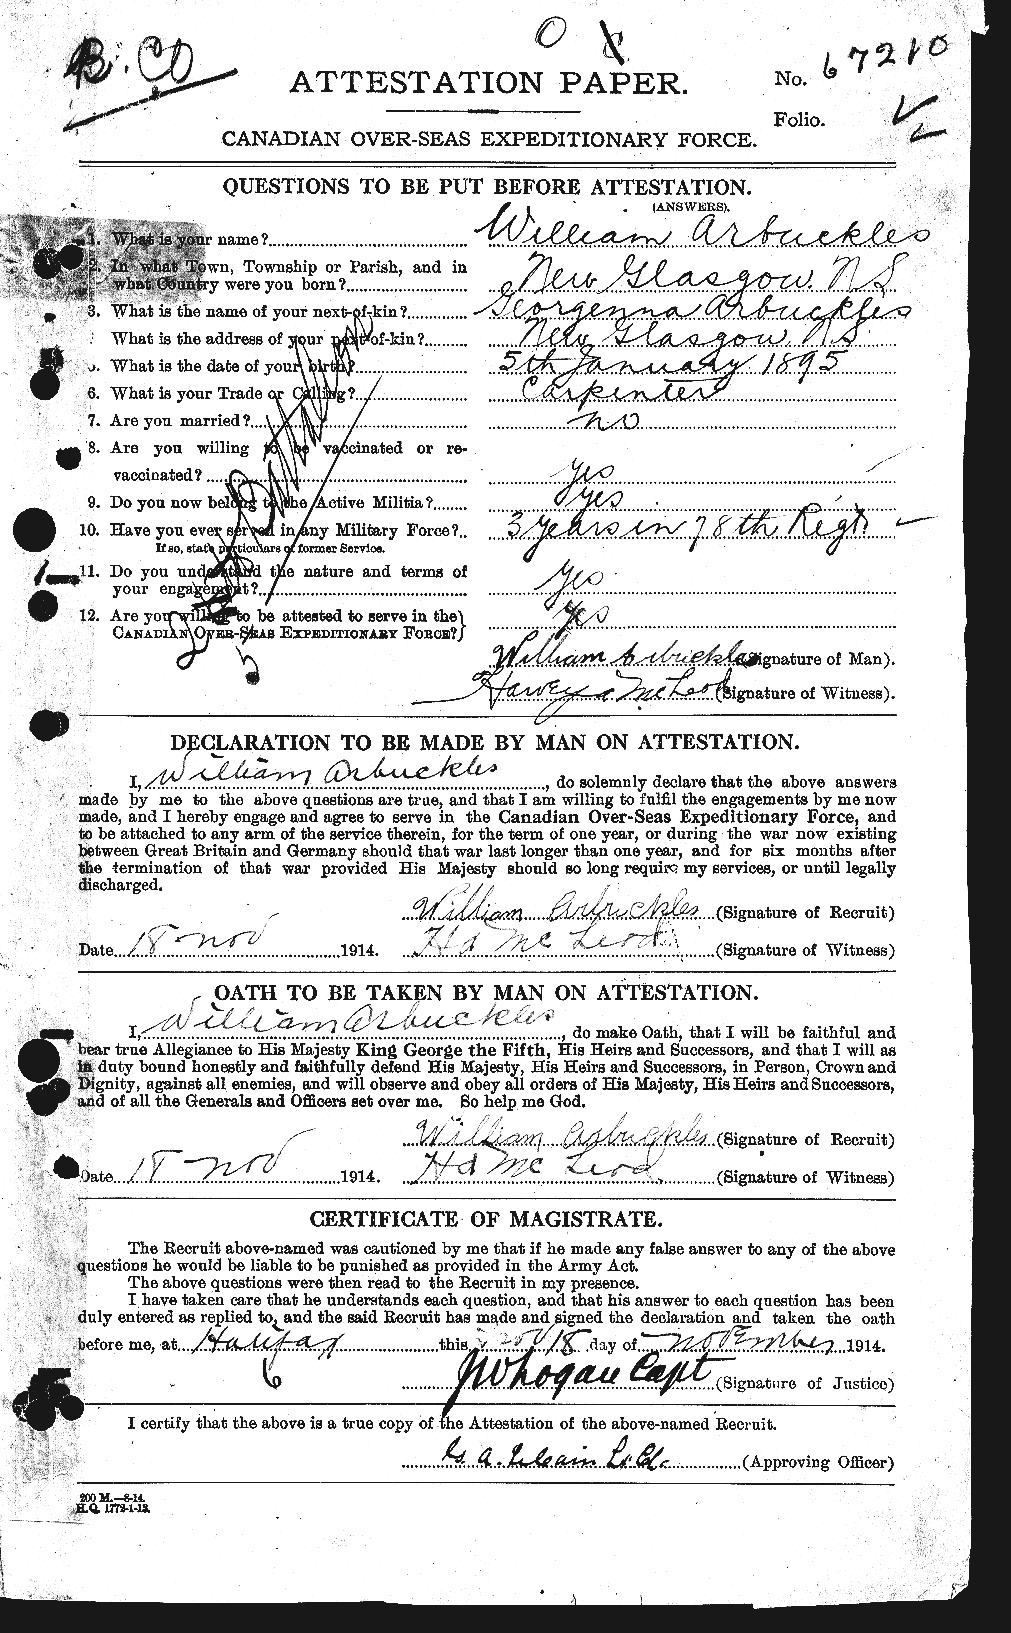 Personnel Records of the First World War - CEF 211044a